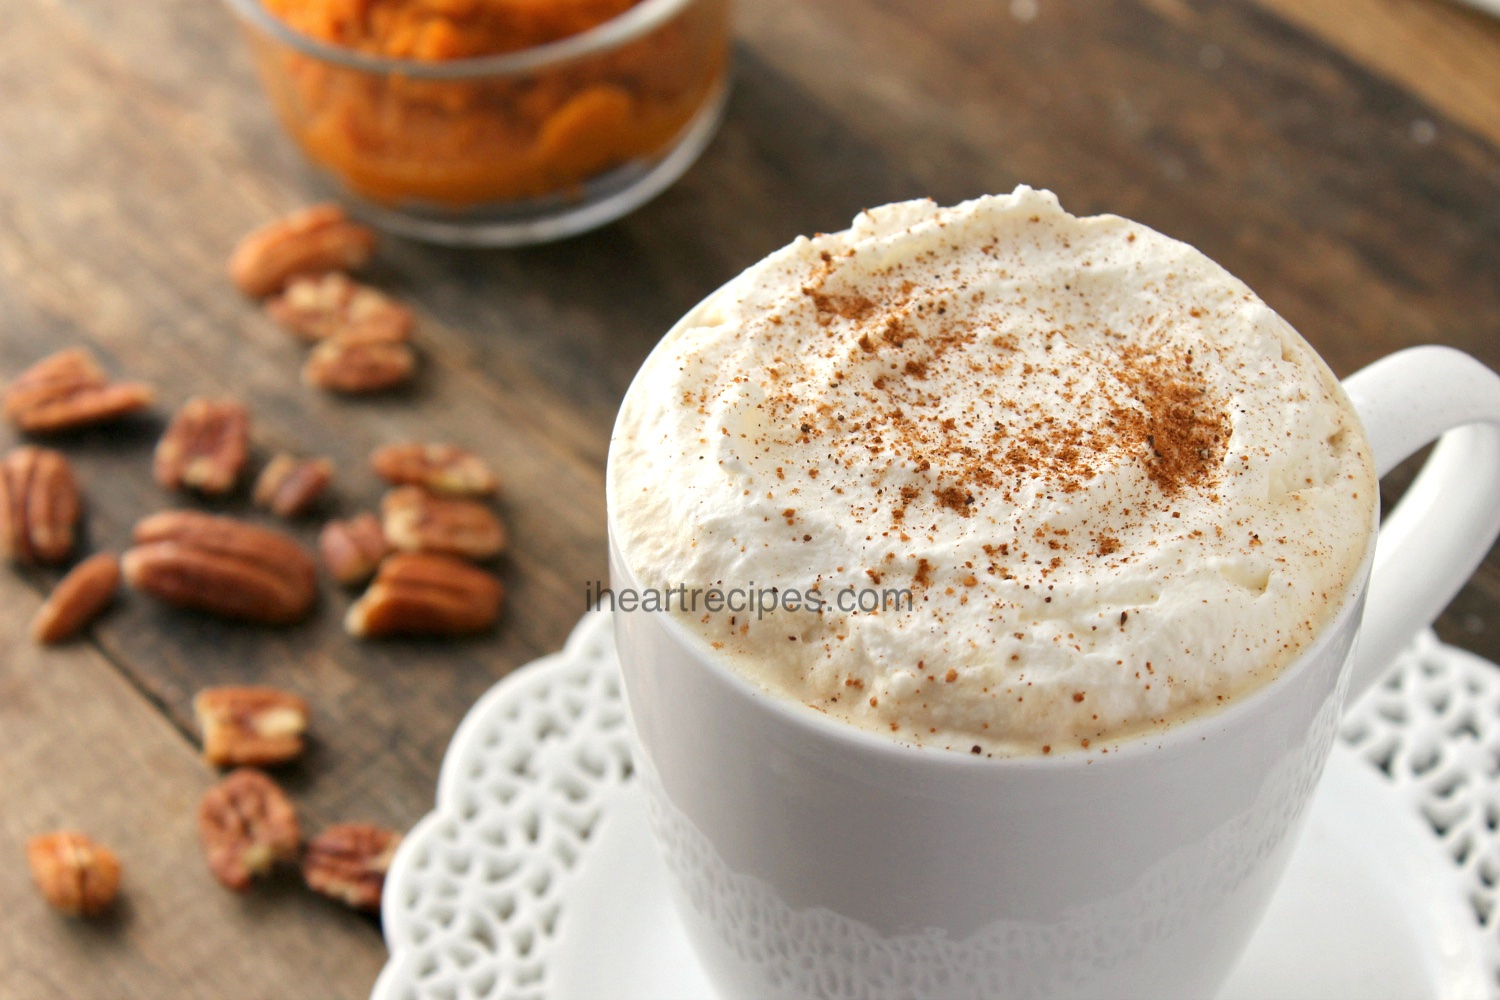 Sweet whipped cream and pumpkin spice make this coffee drink a seasonal favorite!